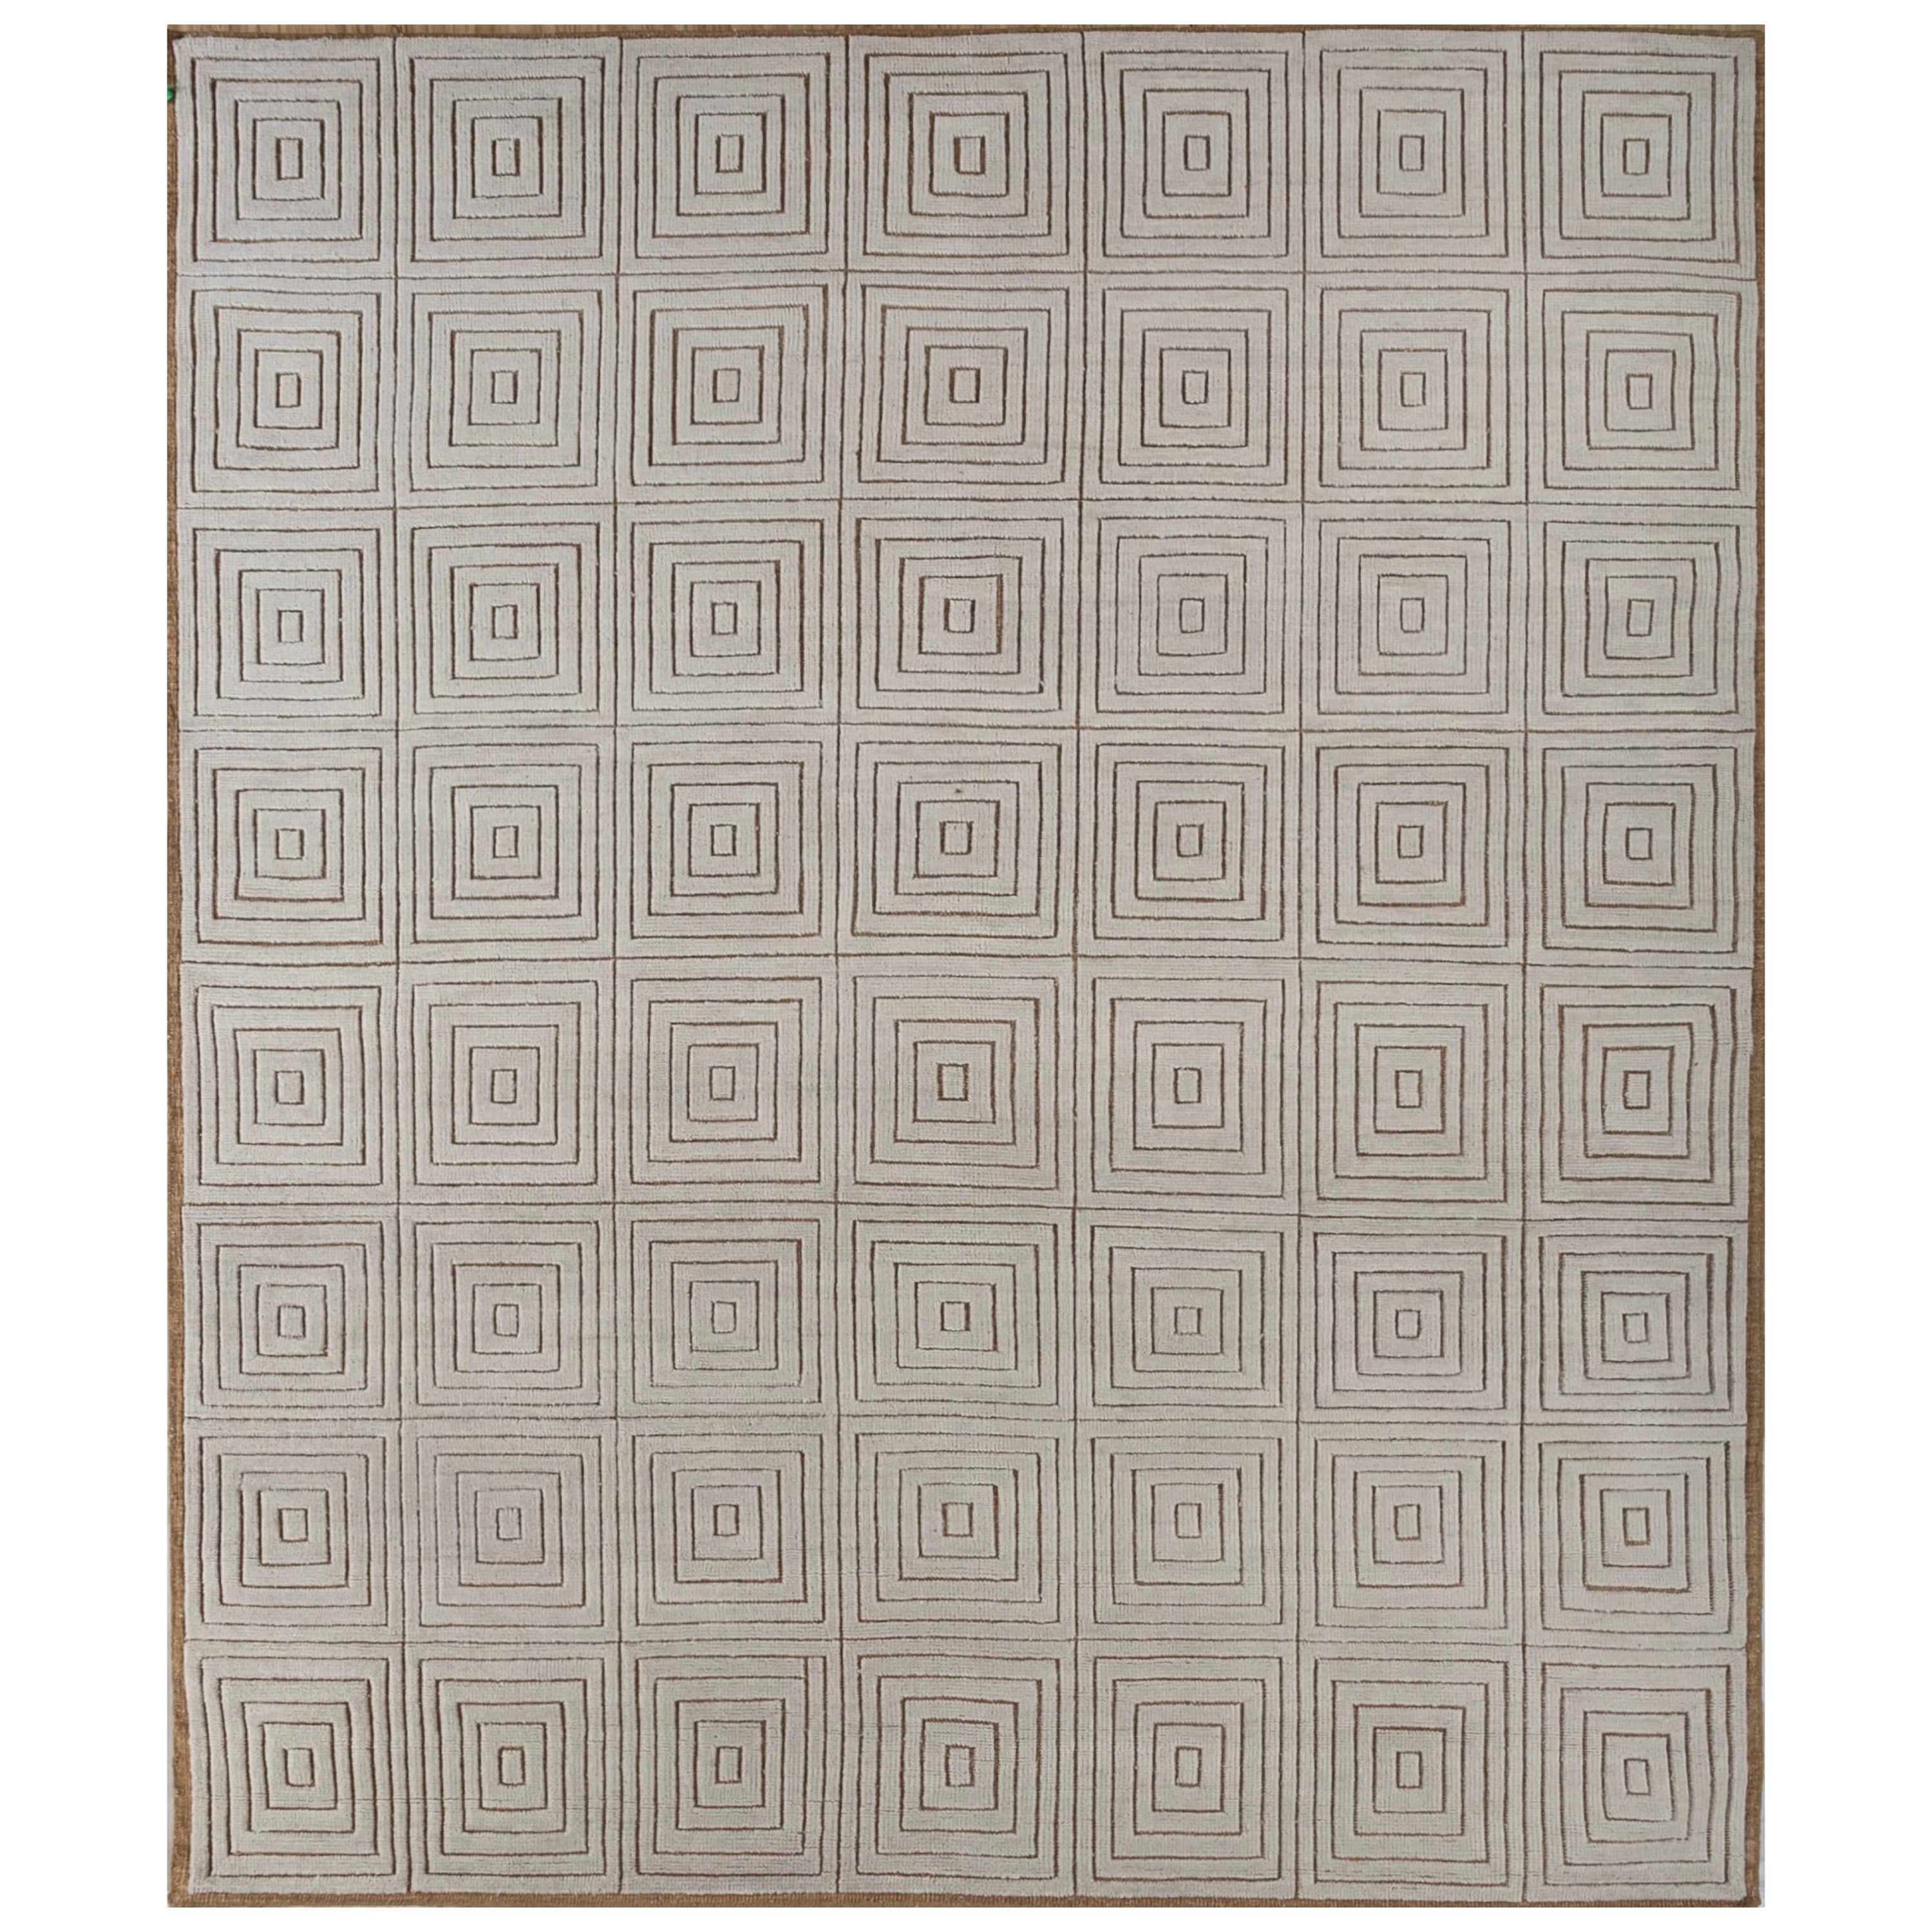 Sahara Dreams Antique White & Honey Yellow 240X300 cm Handknotted Rug For Sale